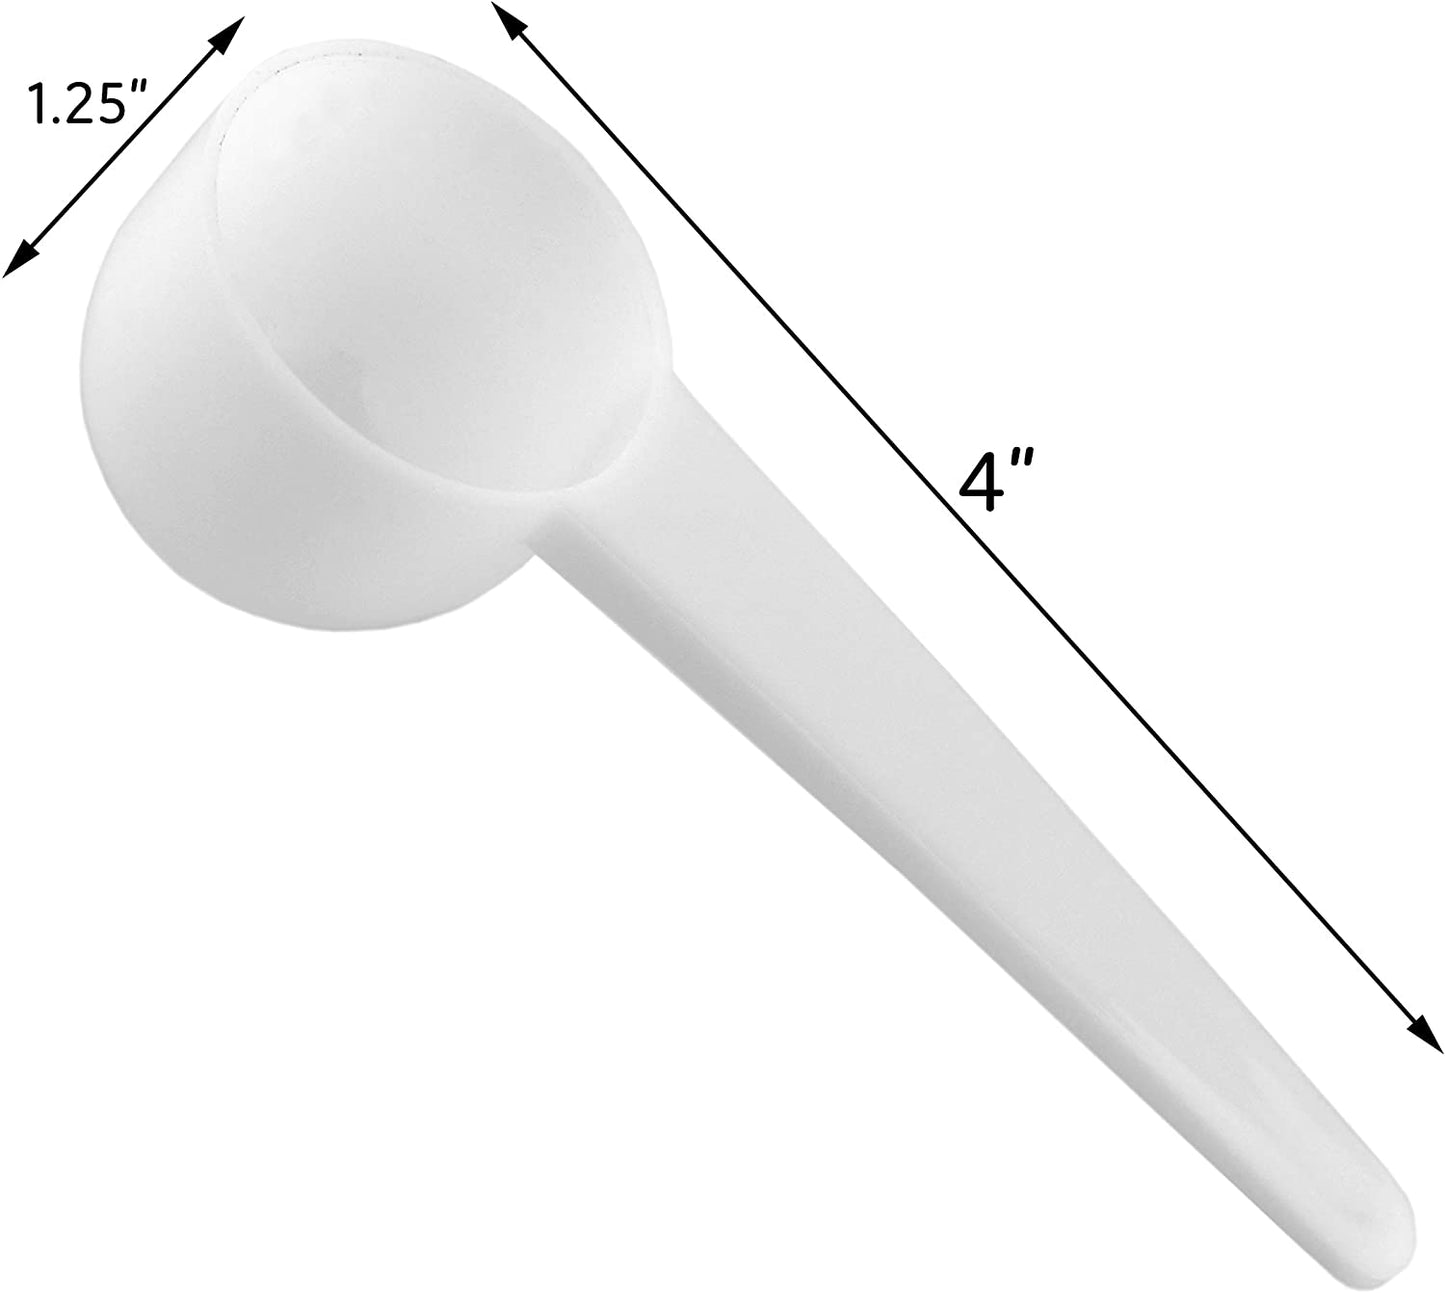 Coffee Scoops / Tablespoon Plastic Measuring Spoons (10-Pack)